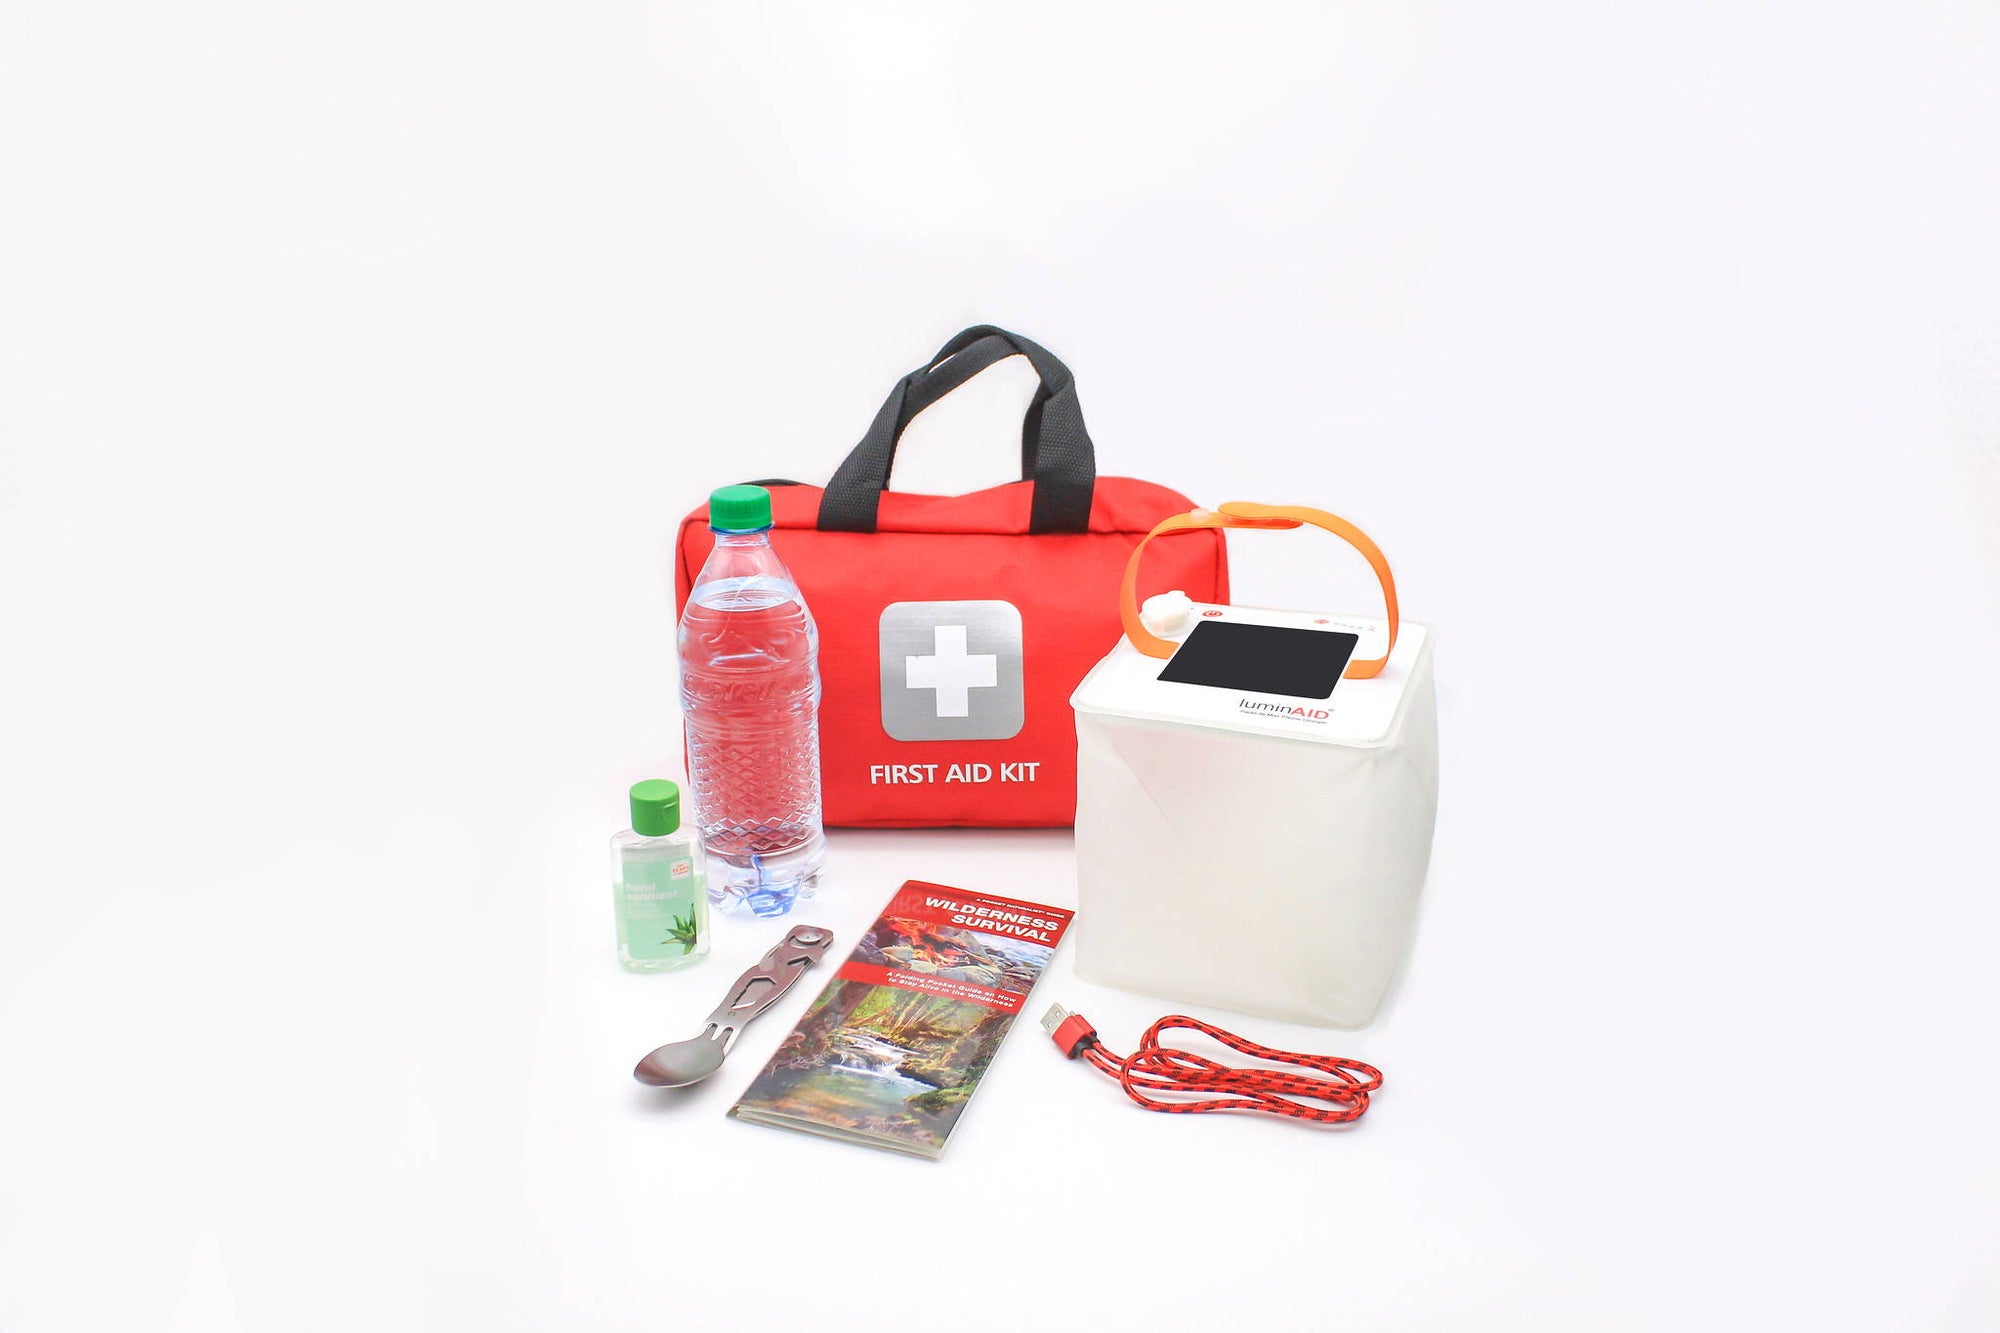 LuminAID Featured in SPY's 15 Best Emergency Kits